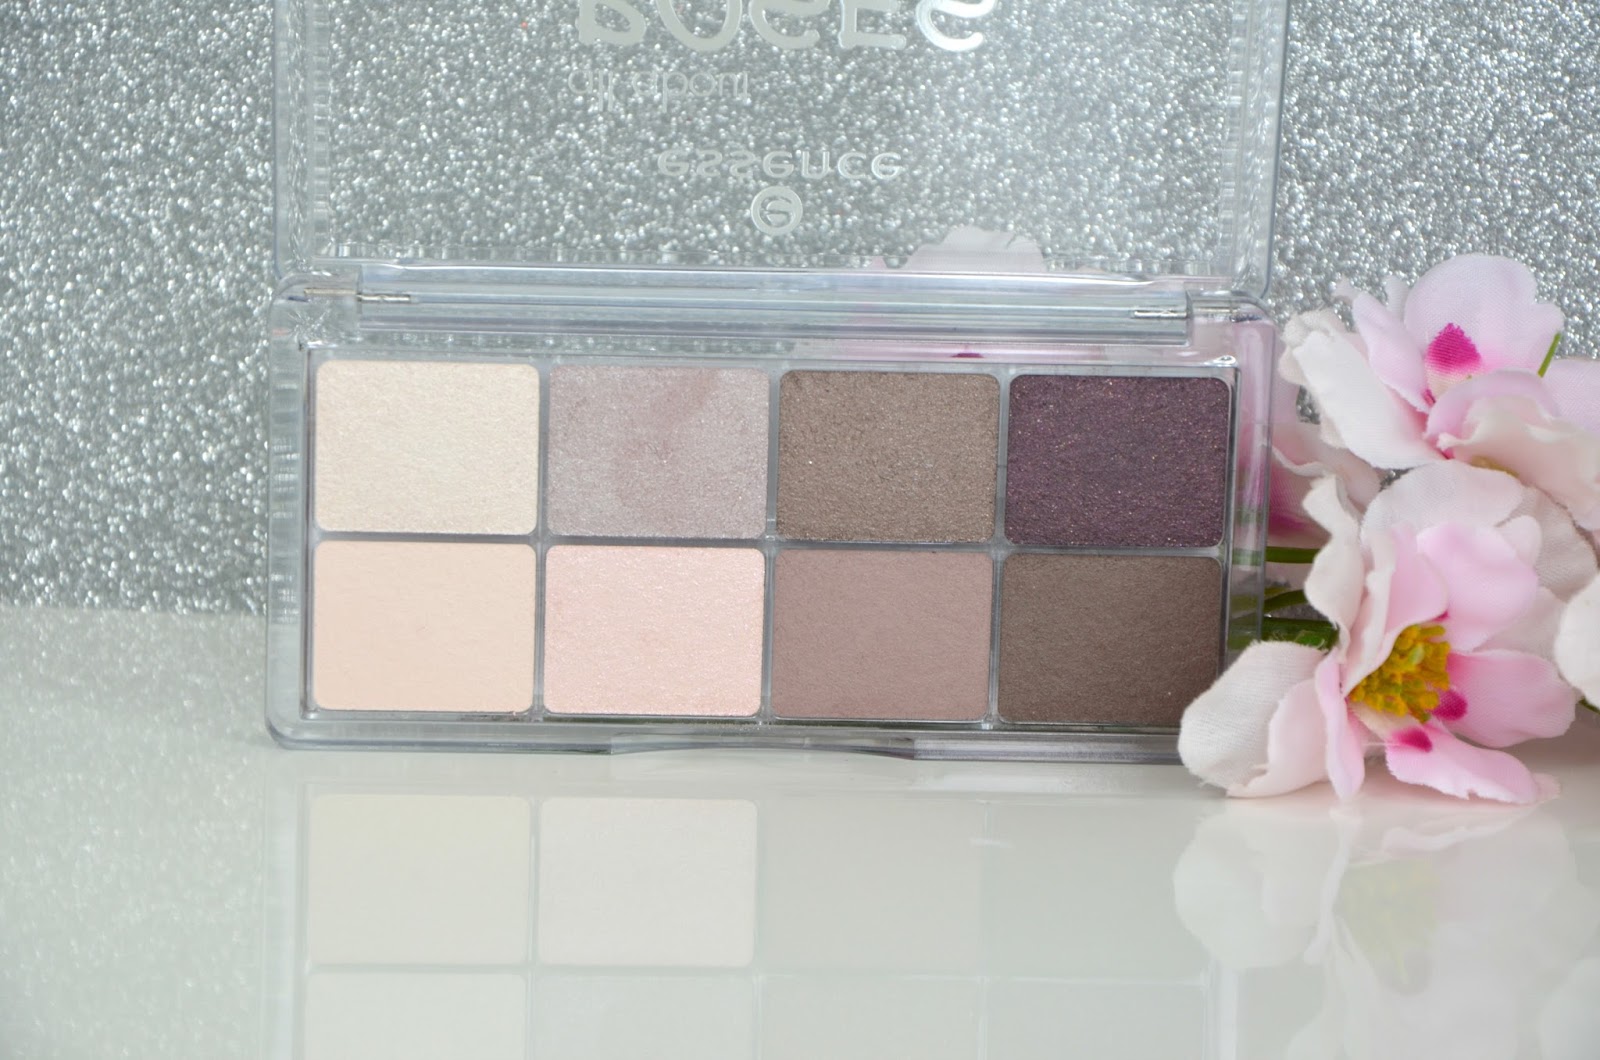 Essence All about roses eyeshadow palette